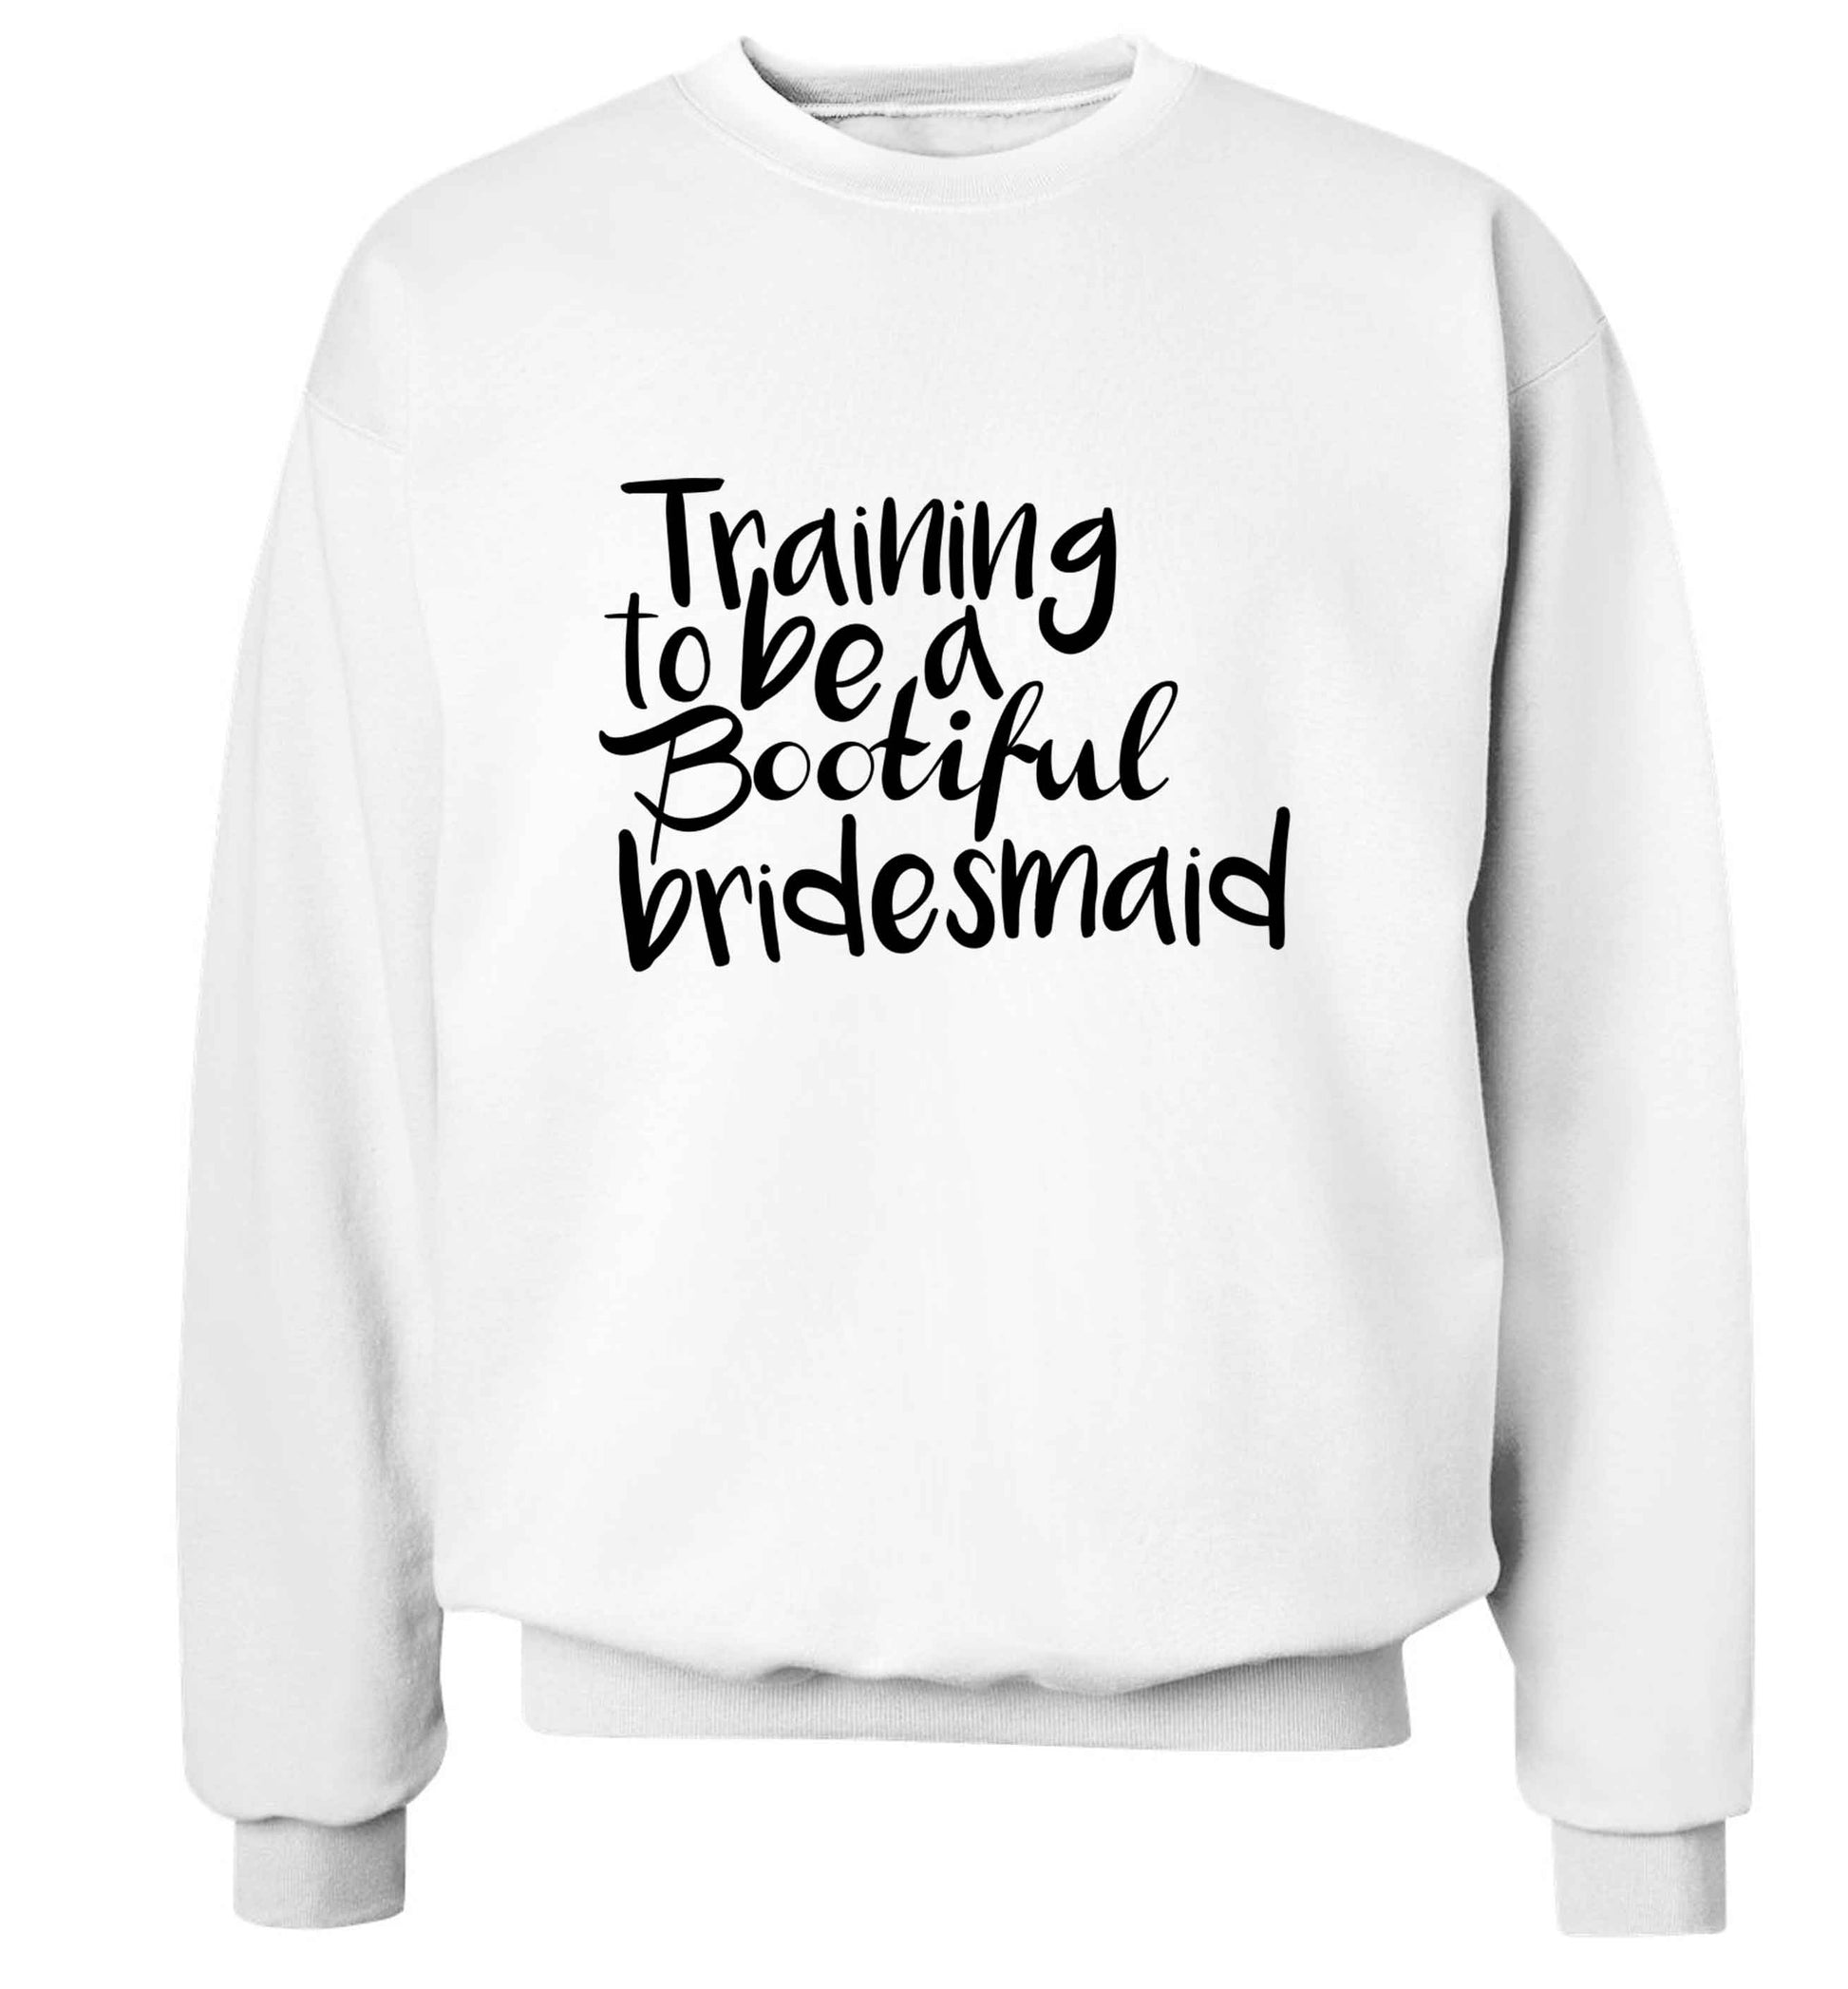 Get motivated and get fit for your big day! Our workout quotes and designs will get you ready to sweat! Perfect for any bride, groom or bridesmaid to be!  adult's unisex white sweater 2XL